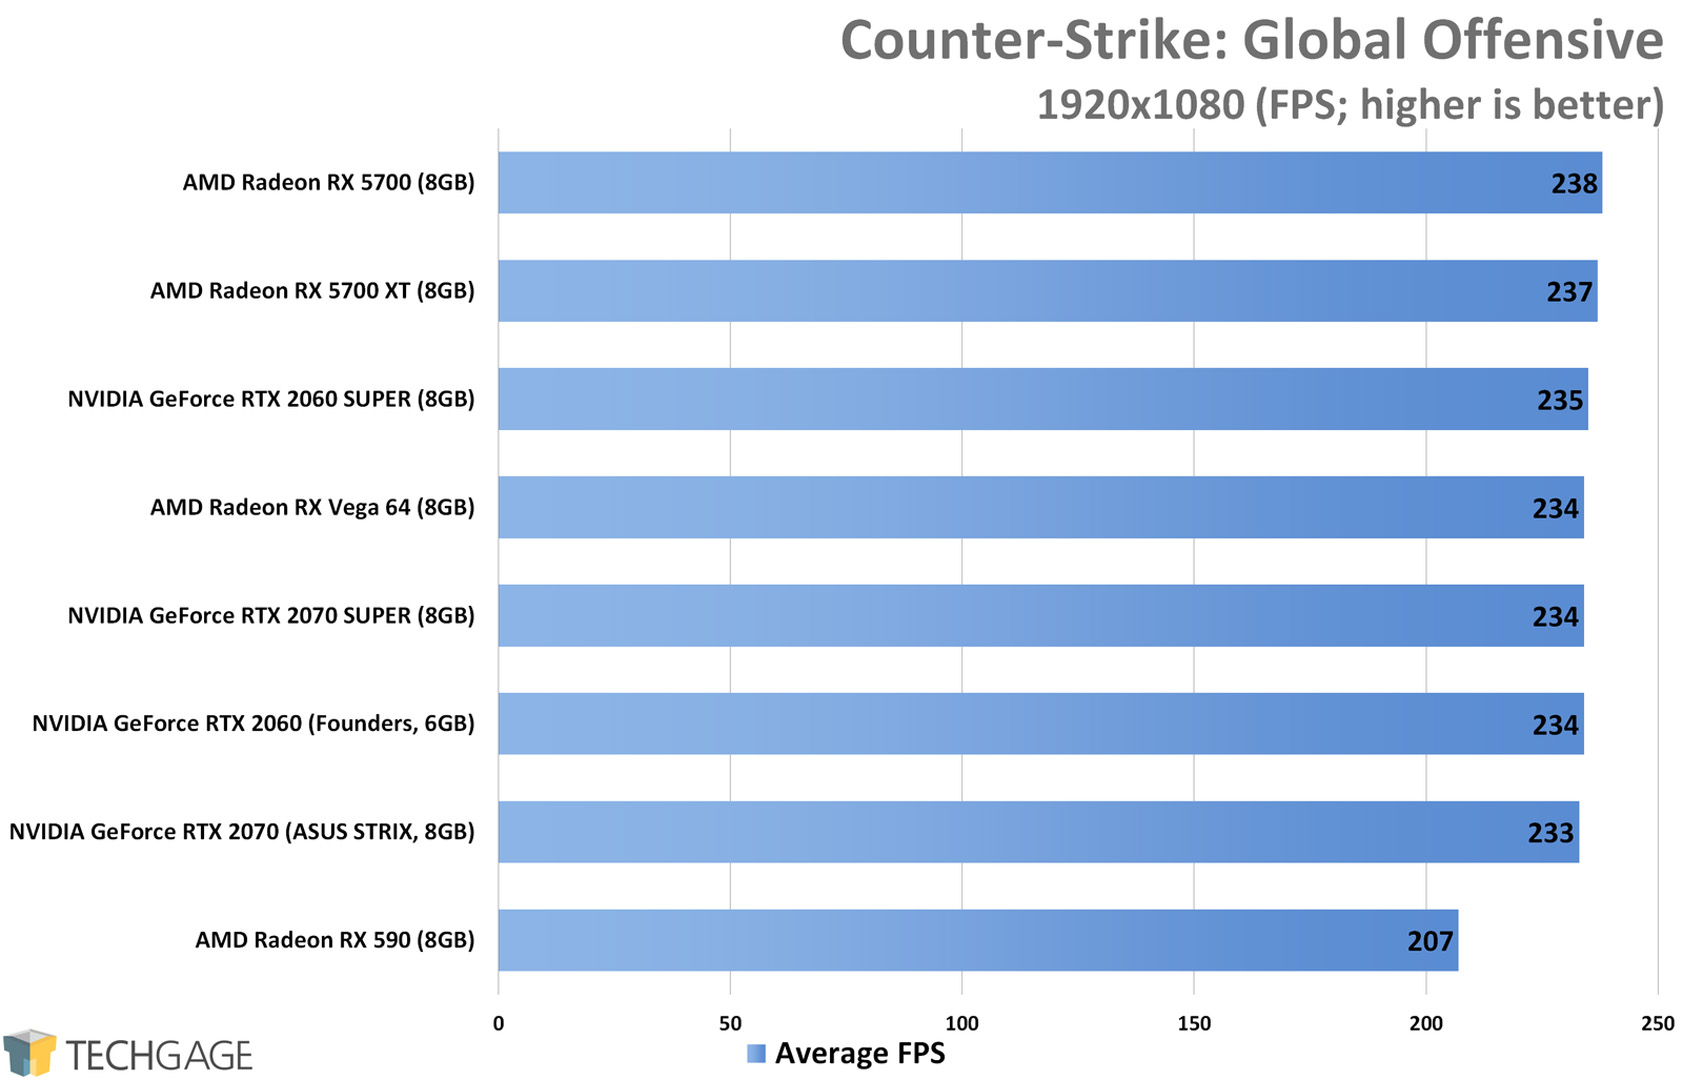 Counter-Strike Global Offensive (1080p) - AMD Radeon RX 5700 XT and RX 5700 Performance